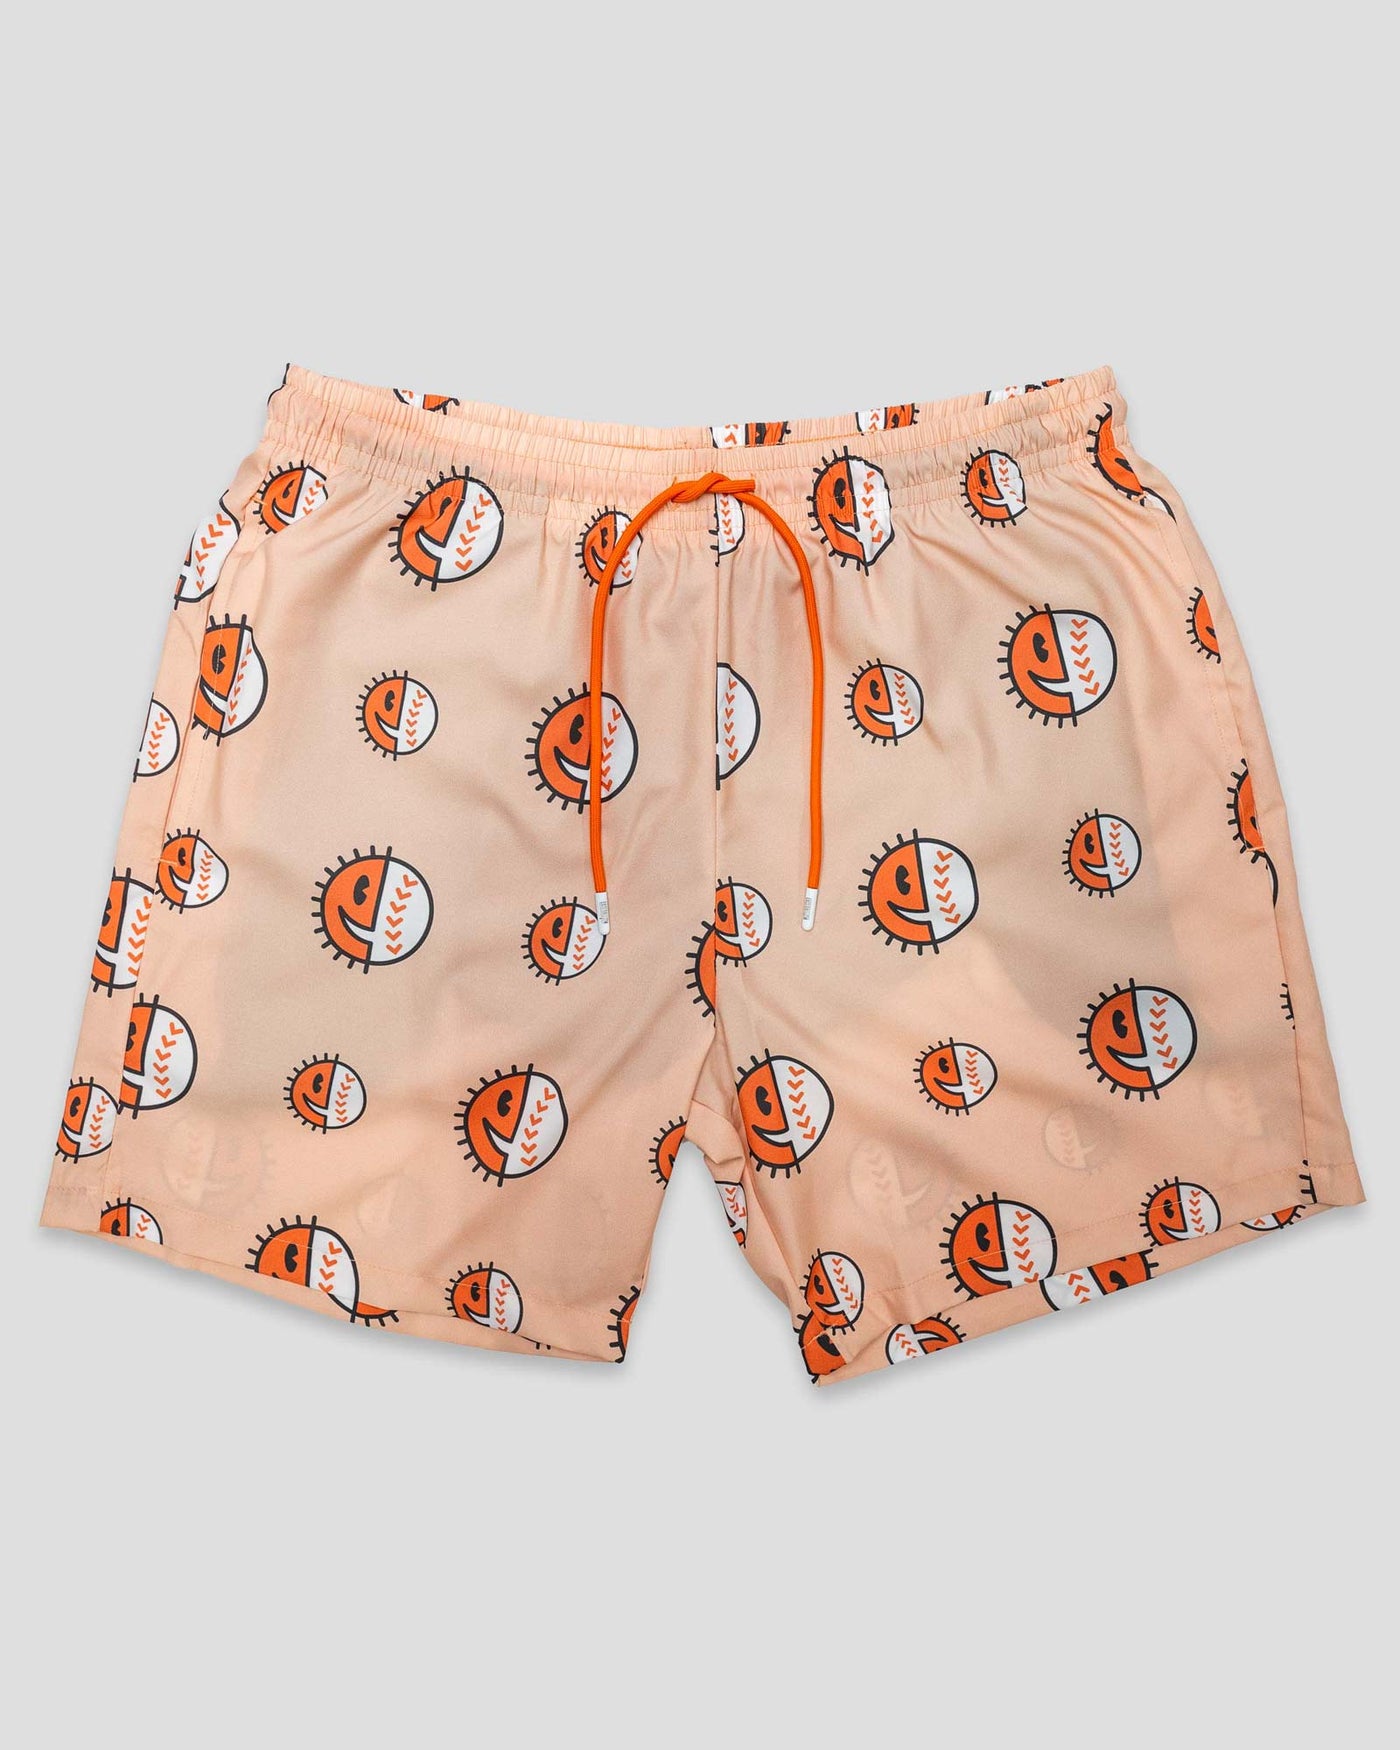 Sunny Days and Double Plays Trunks